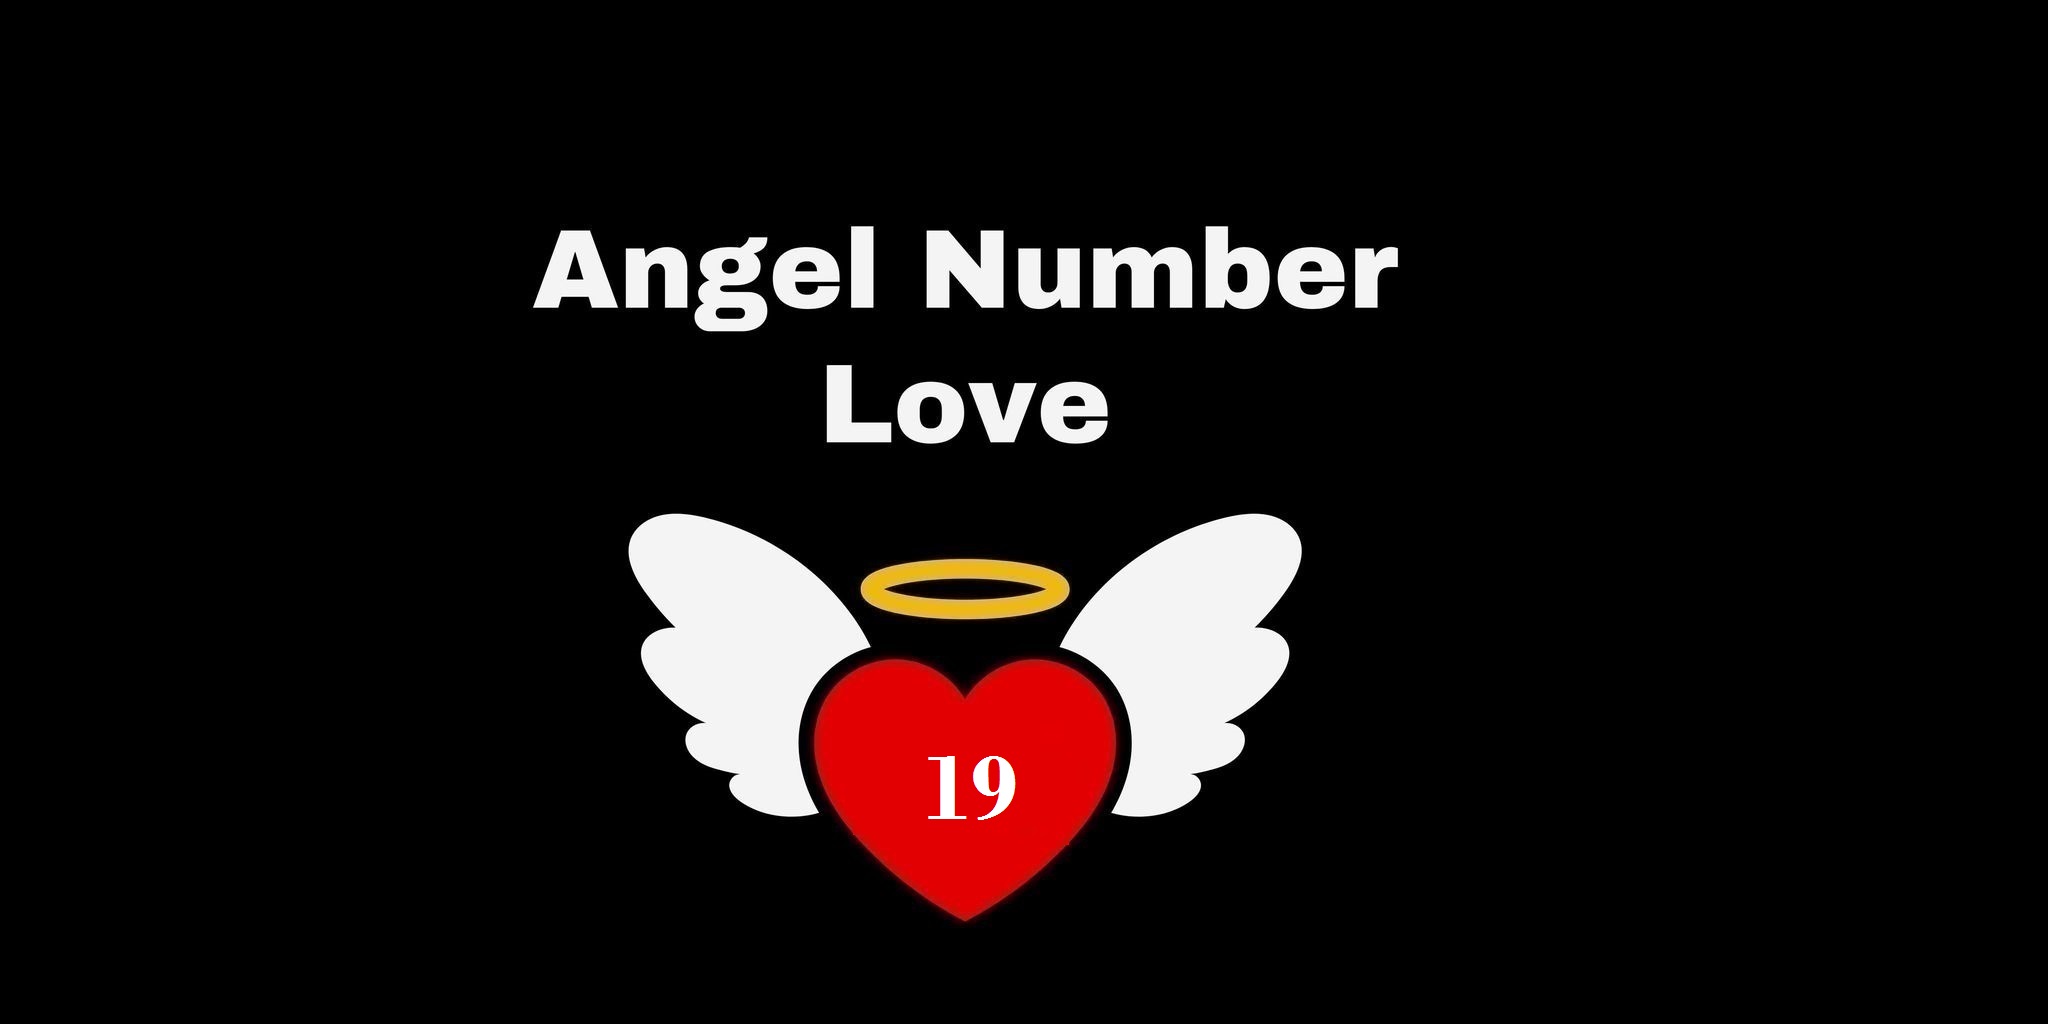 19 Angel Number Meaning In Love